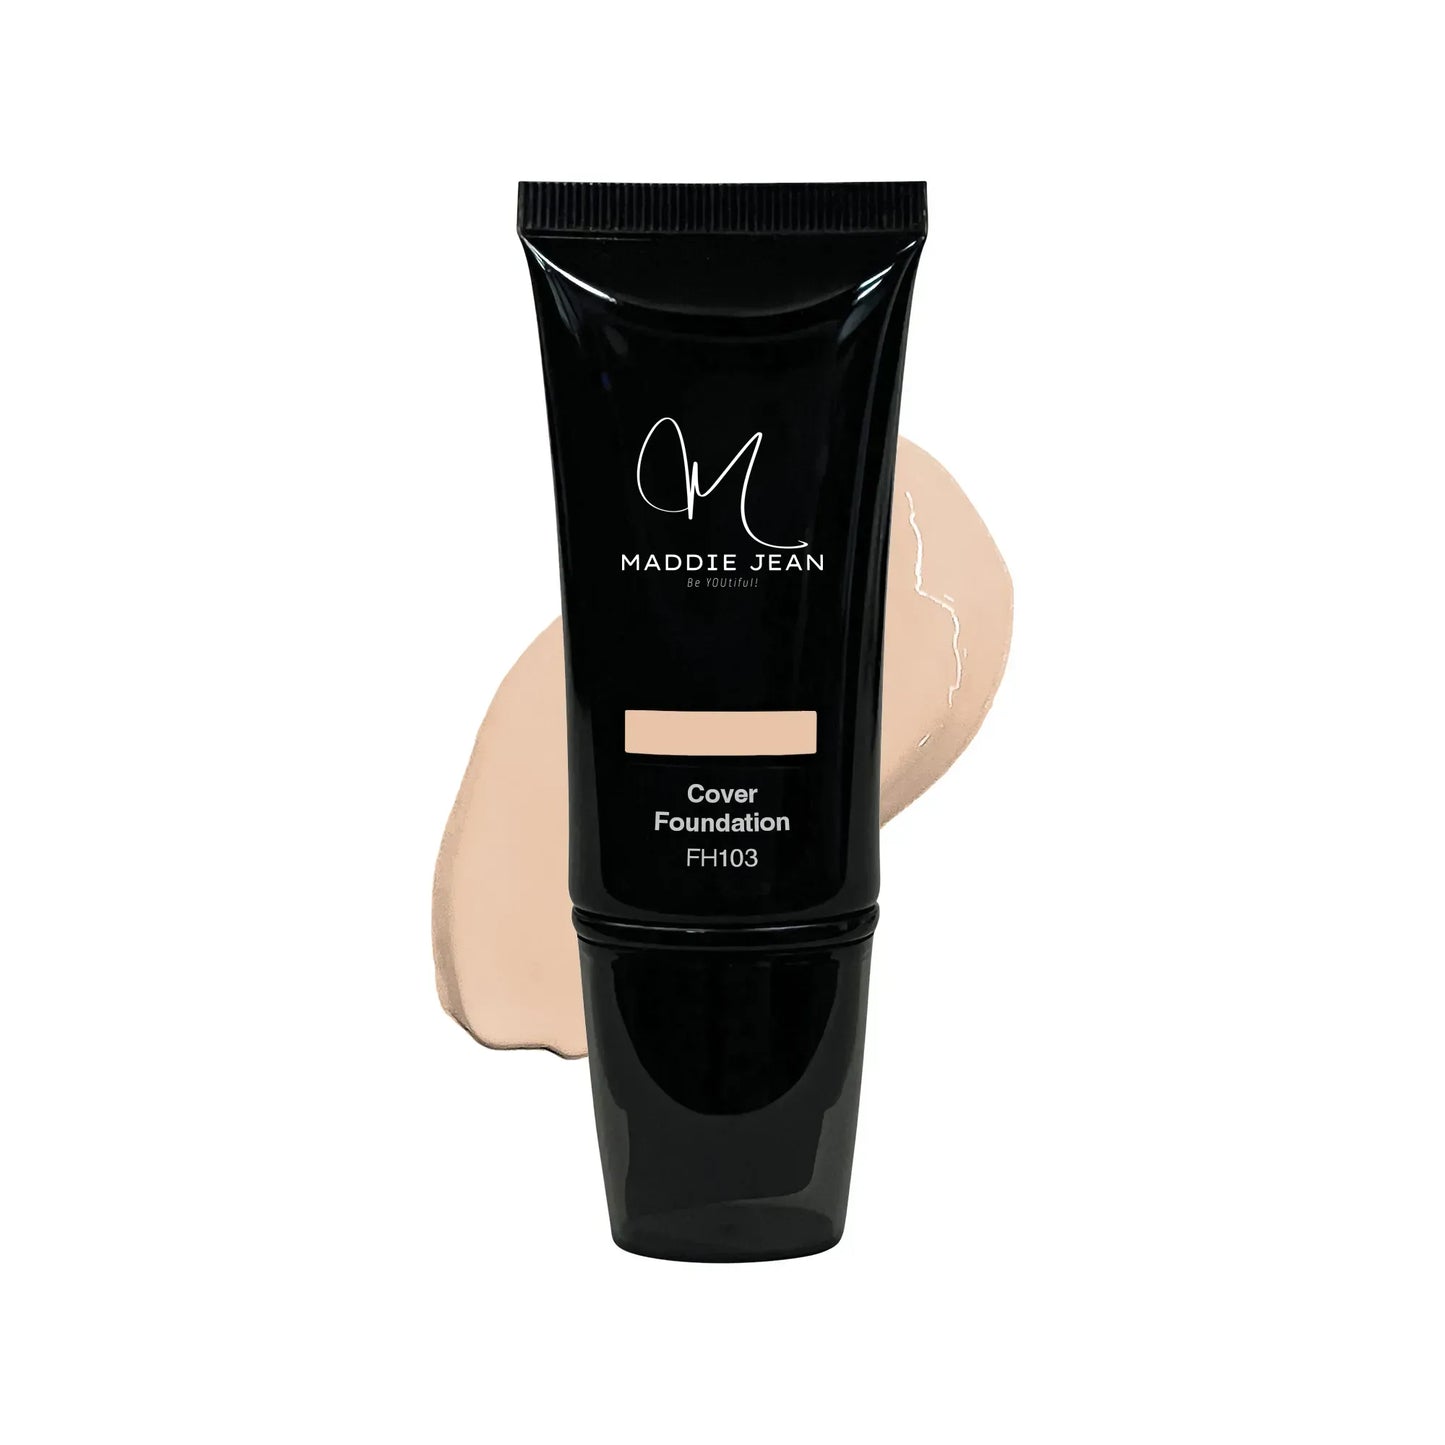 Maddie Jean Full Cover Foundation - Tuscan